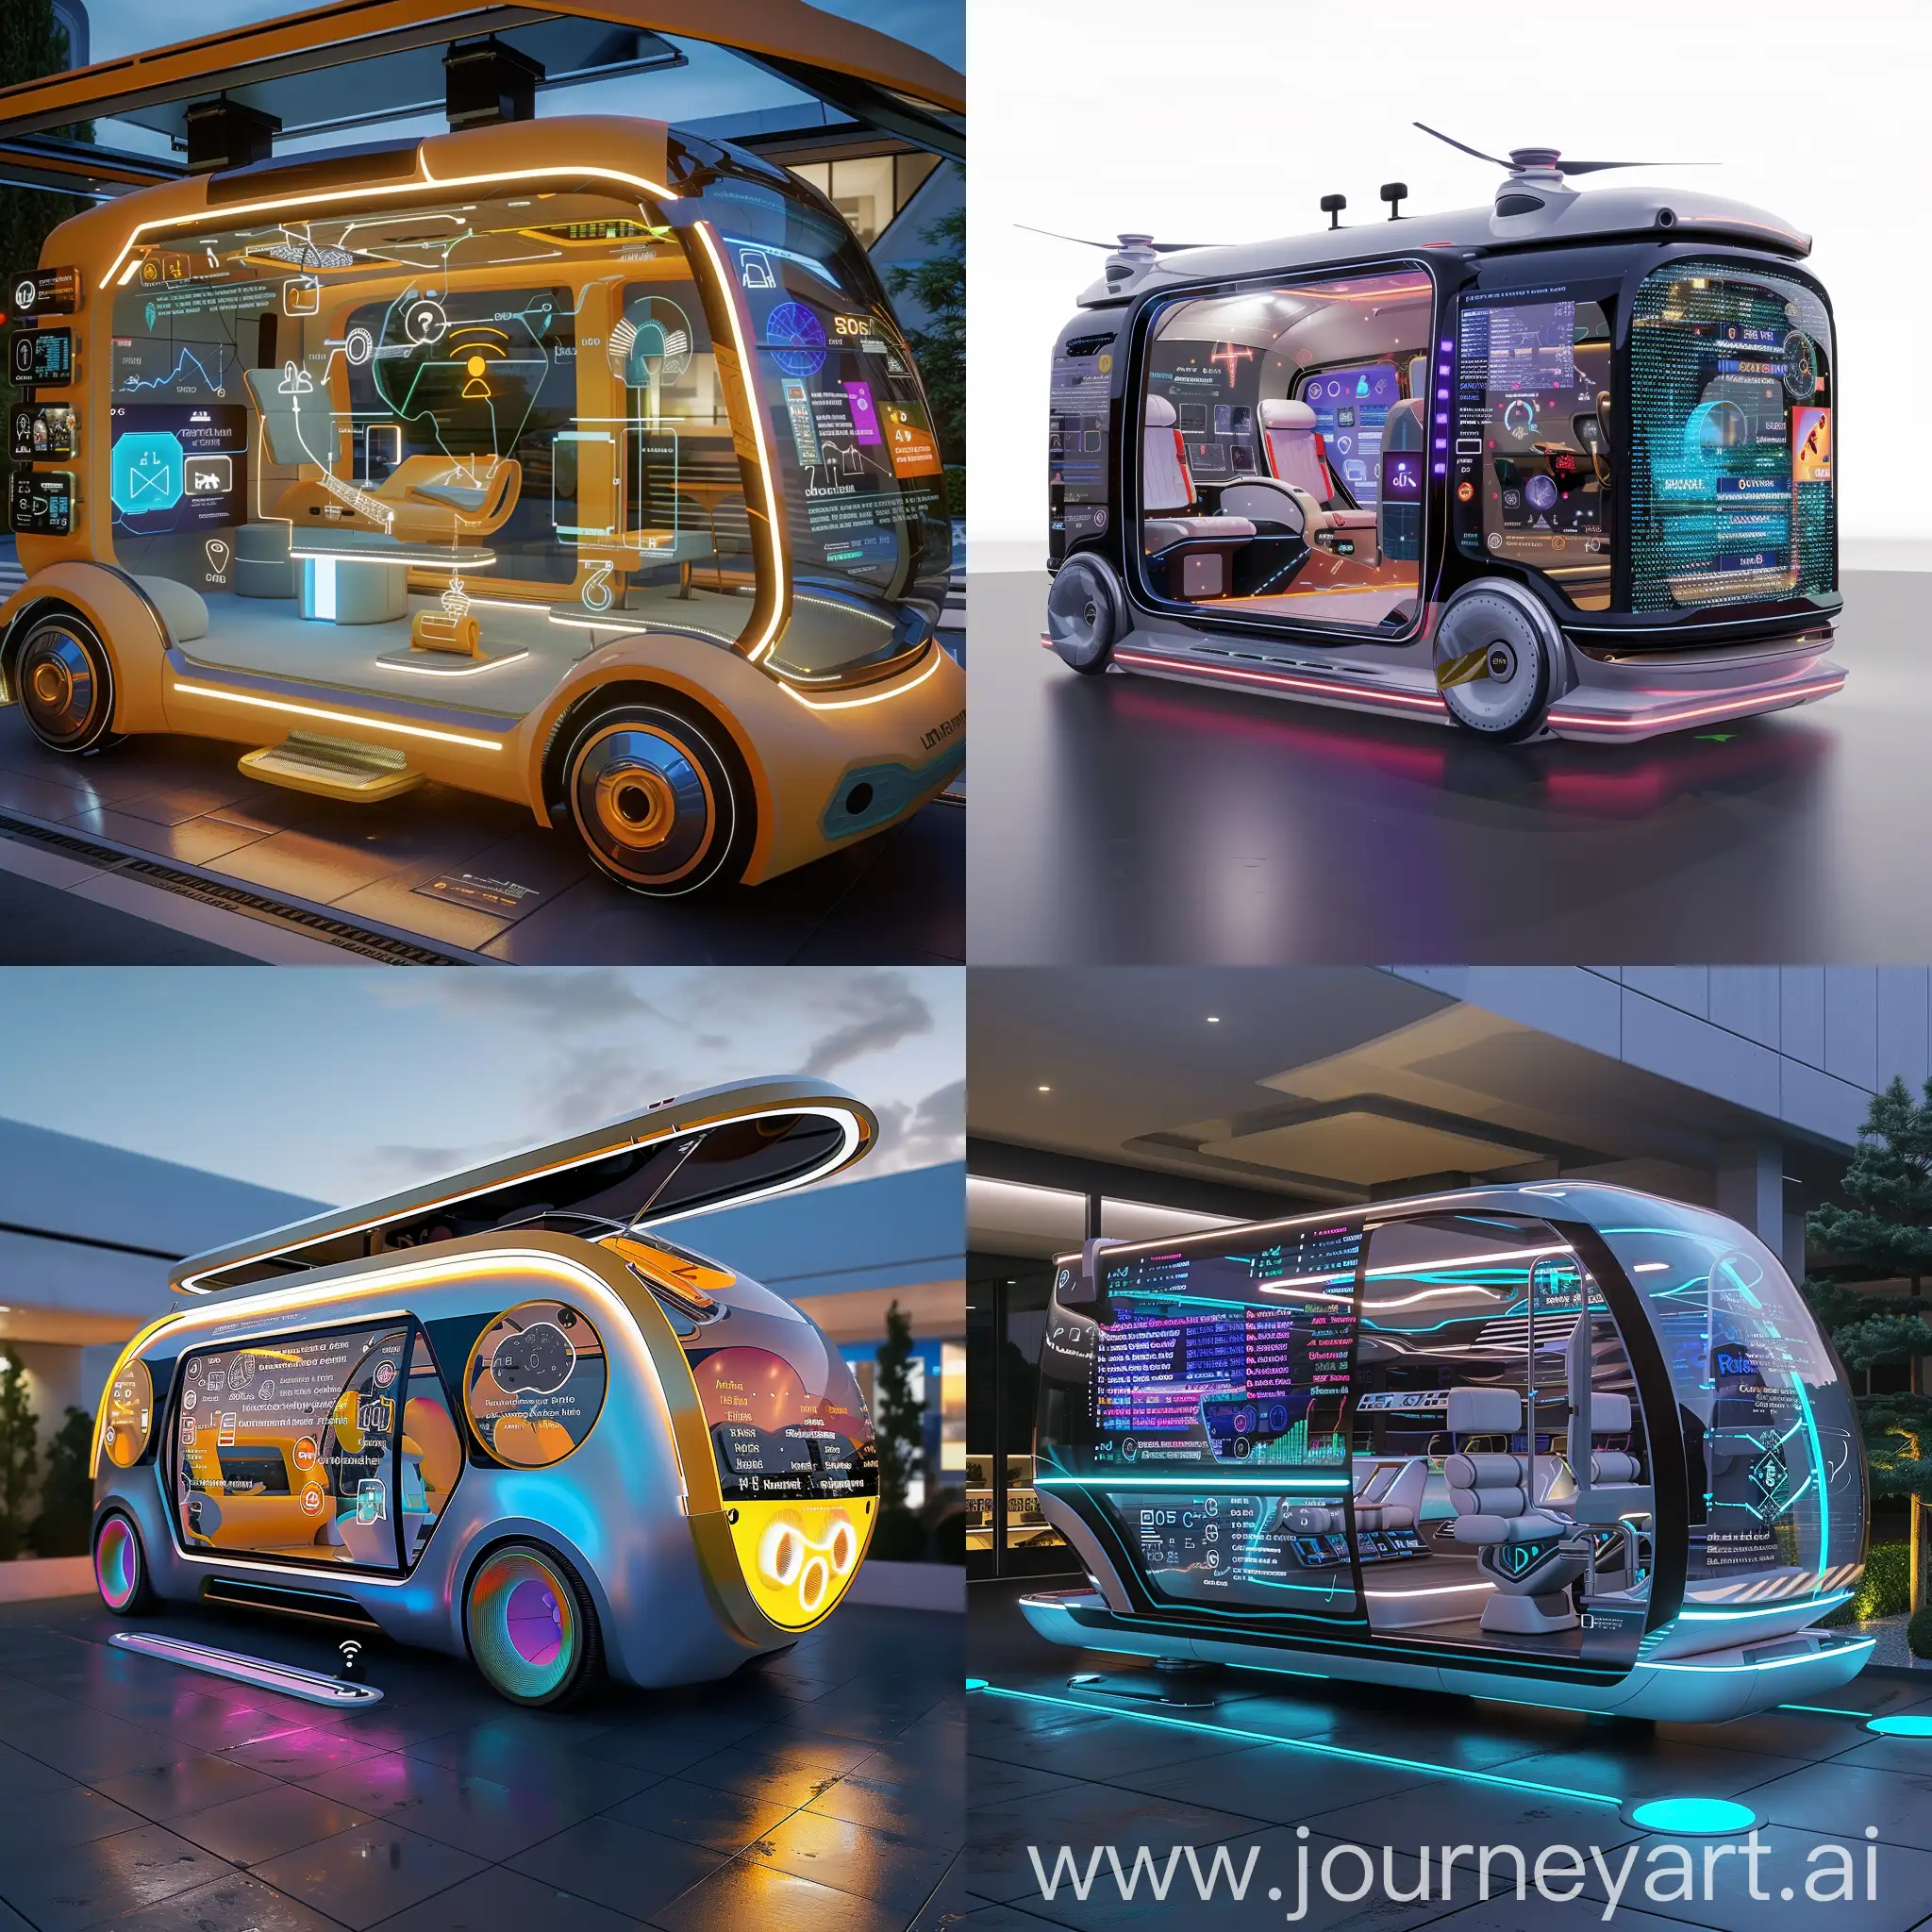 Futuristic-Microbus-with-Autonomous-Driving-and-Holographic-Display-Panels